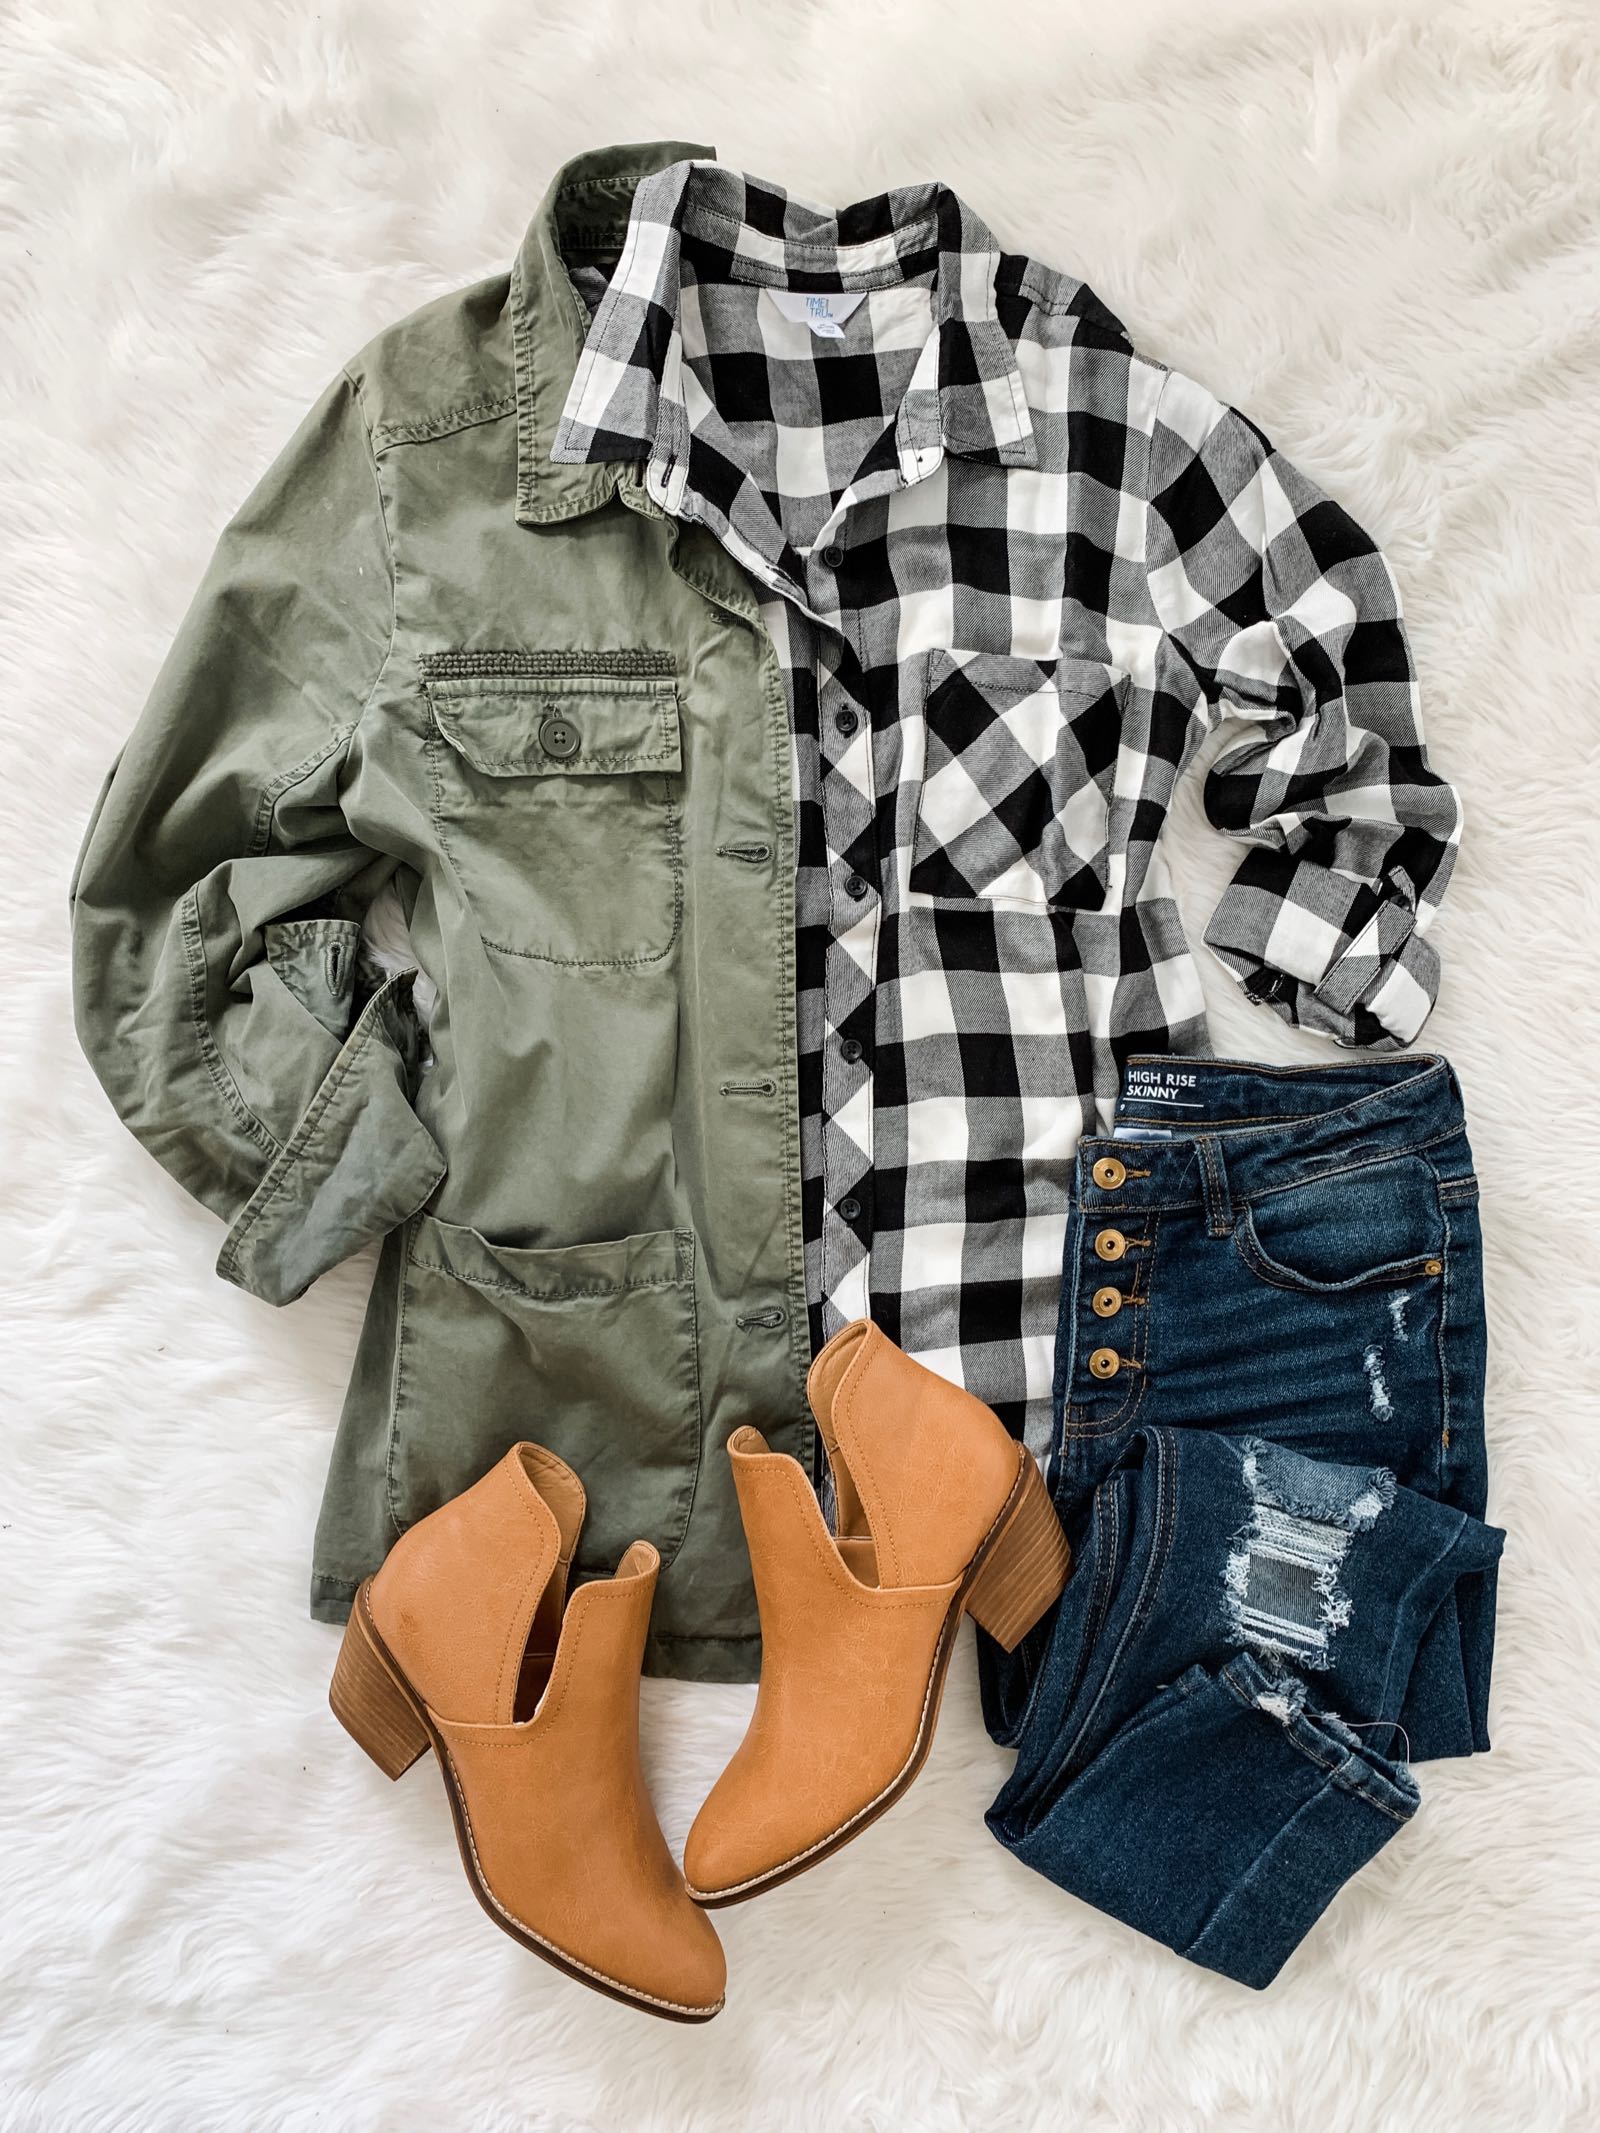 Fall outfit idea with field jacket, buffalo check plaid and ankle booties